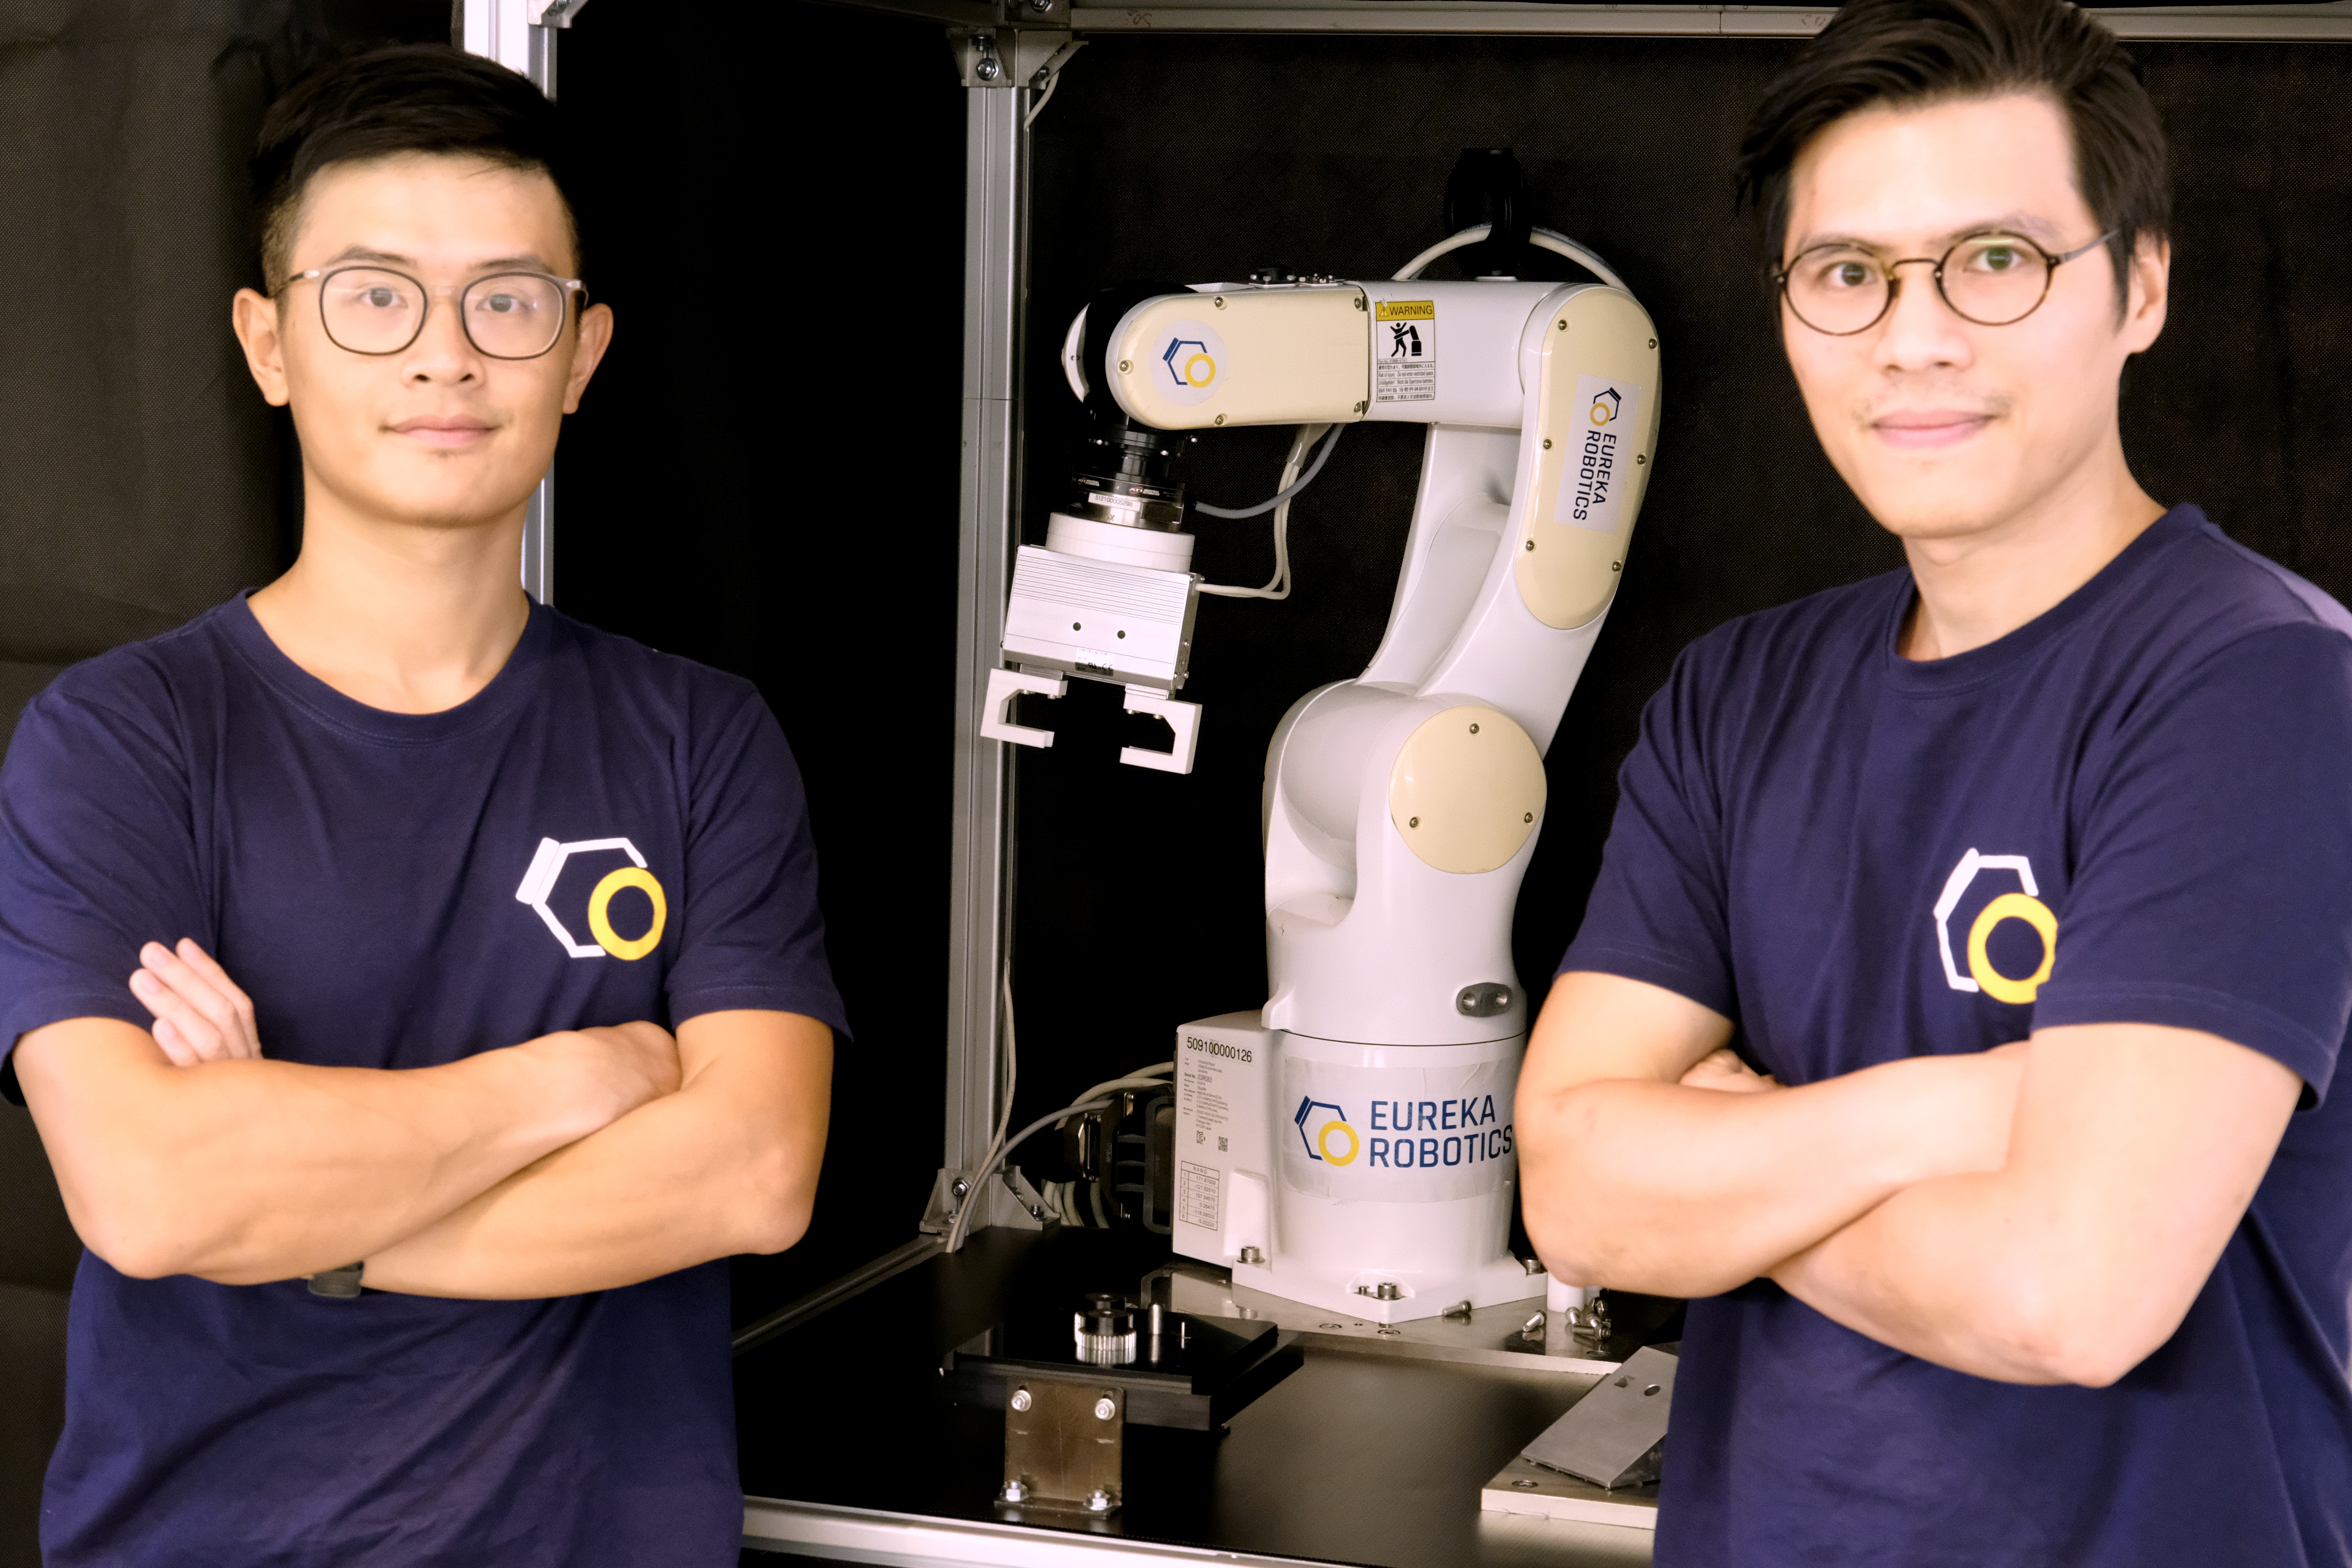 The founders of Eureka Robotics with an Archimedes robot arm